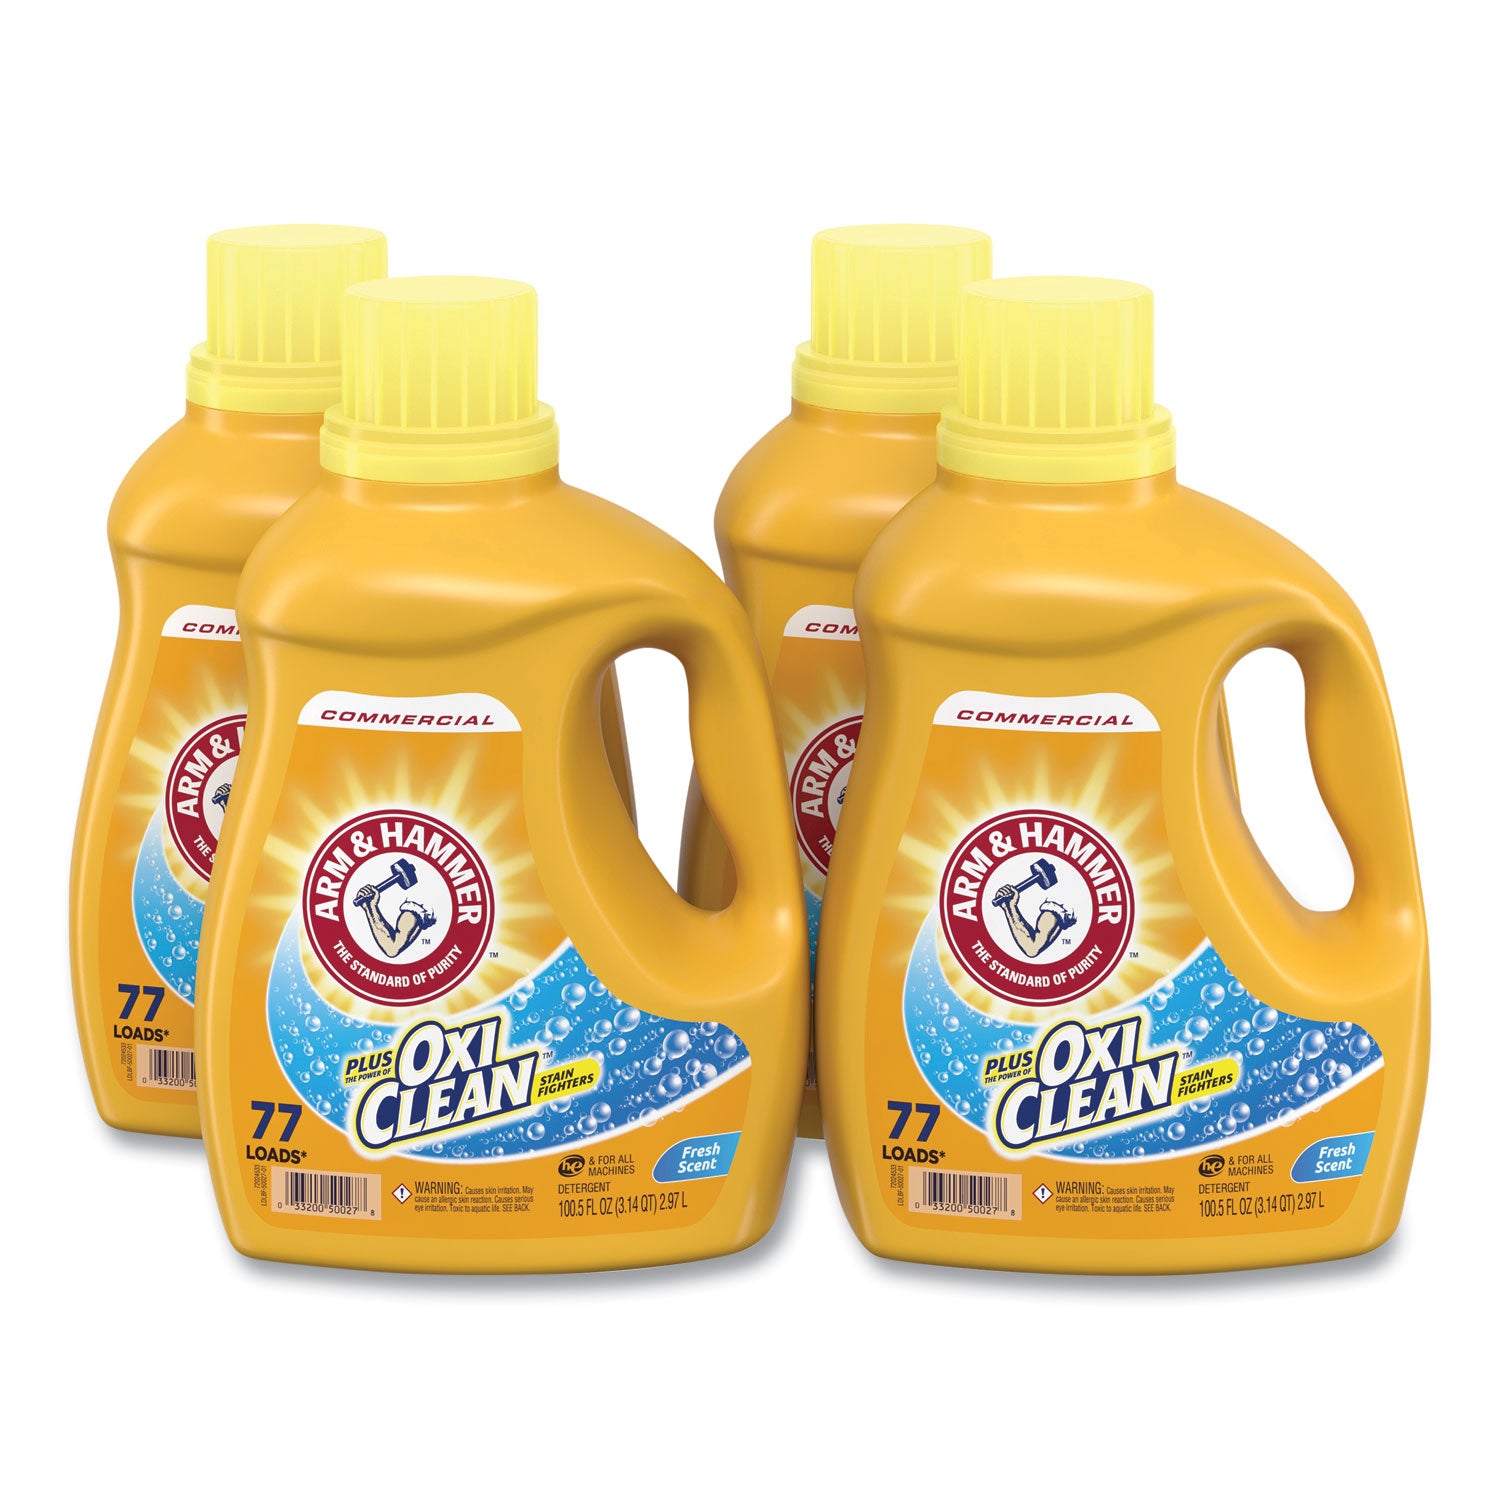 oxiclean-concentrated-liquid-laundry-detergent-fresh-1005-oz-bottle-4-carton_cdc3320050027 - 1